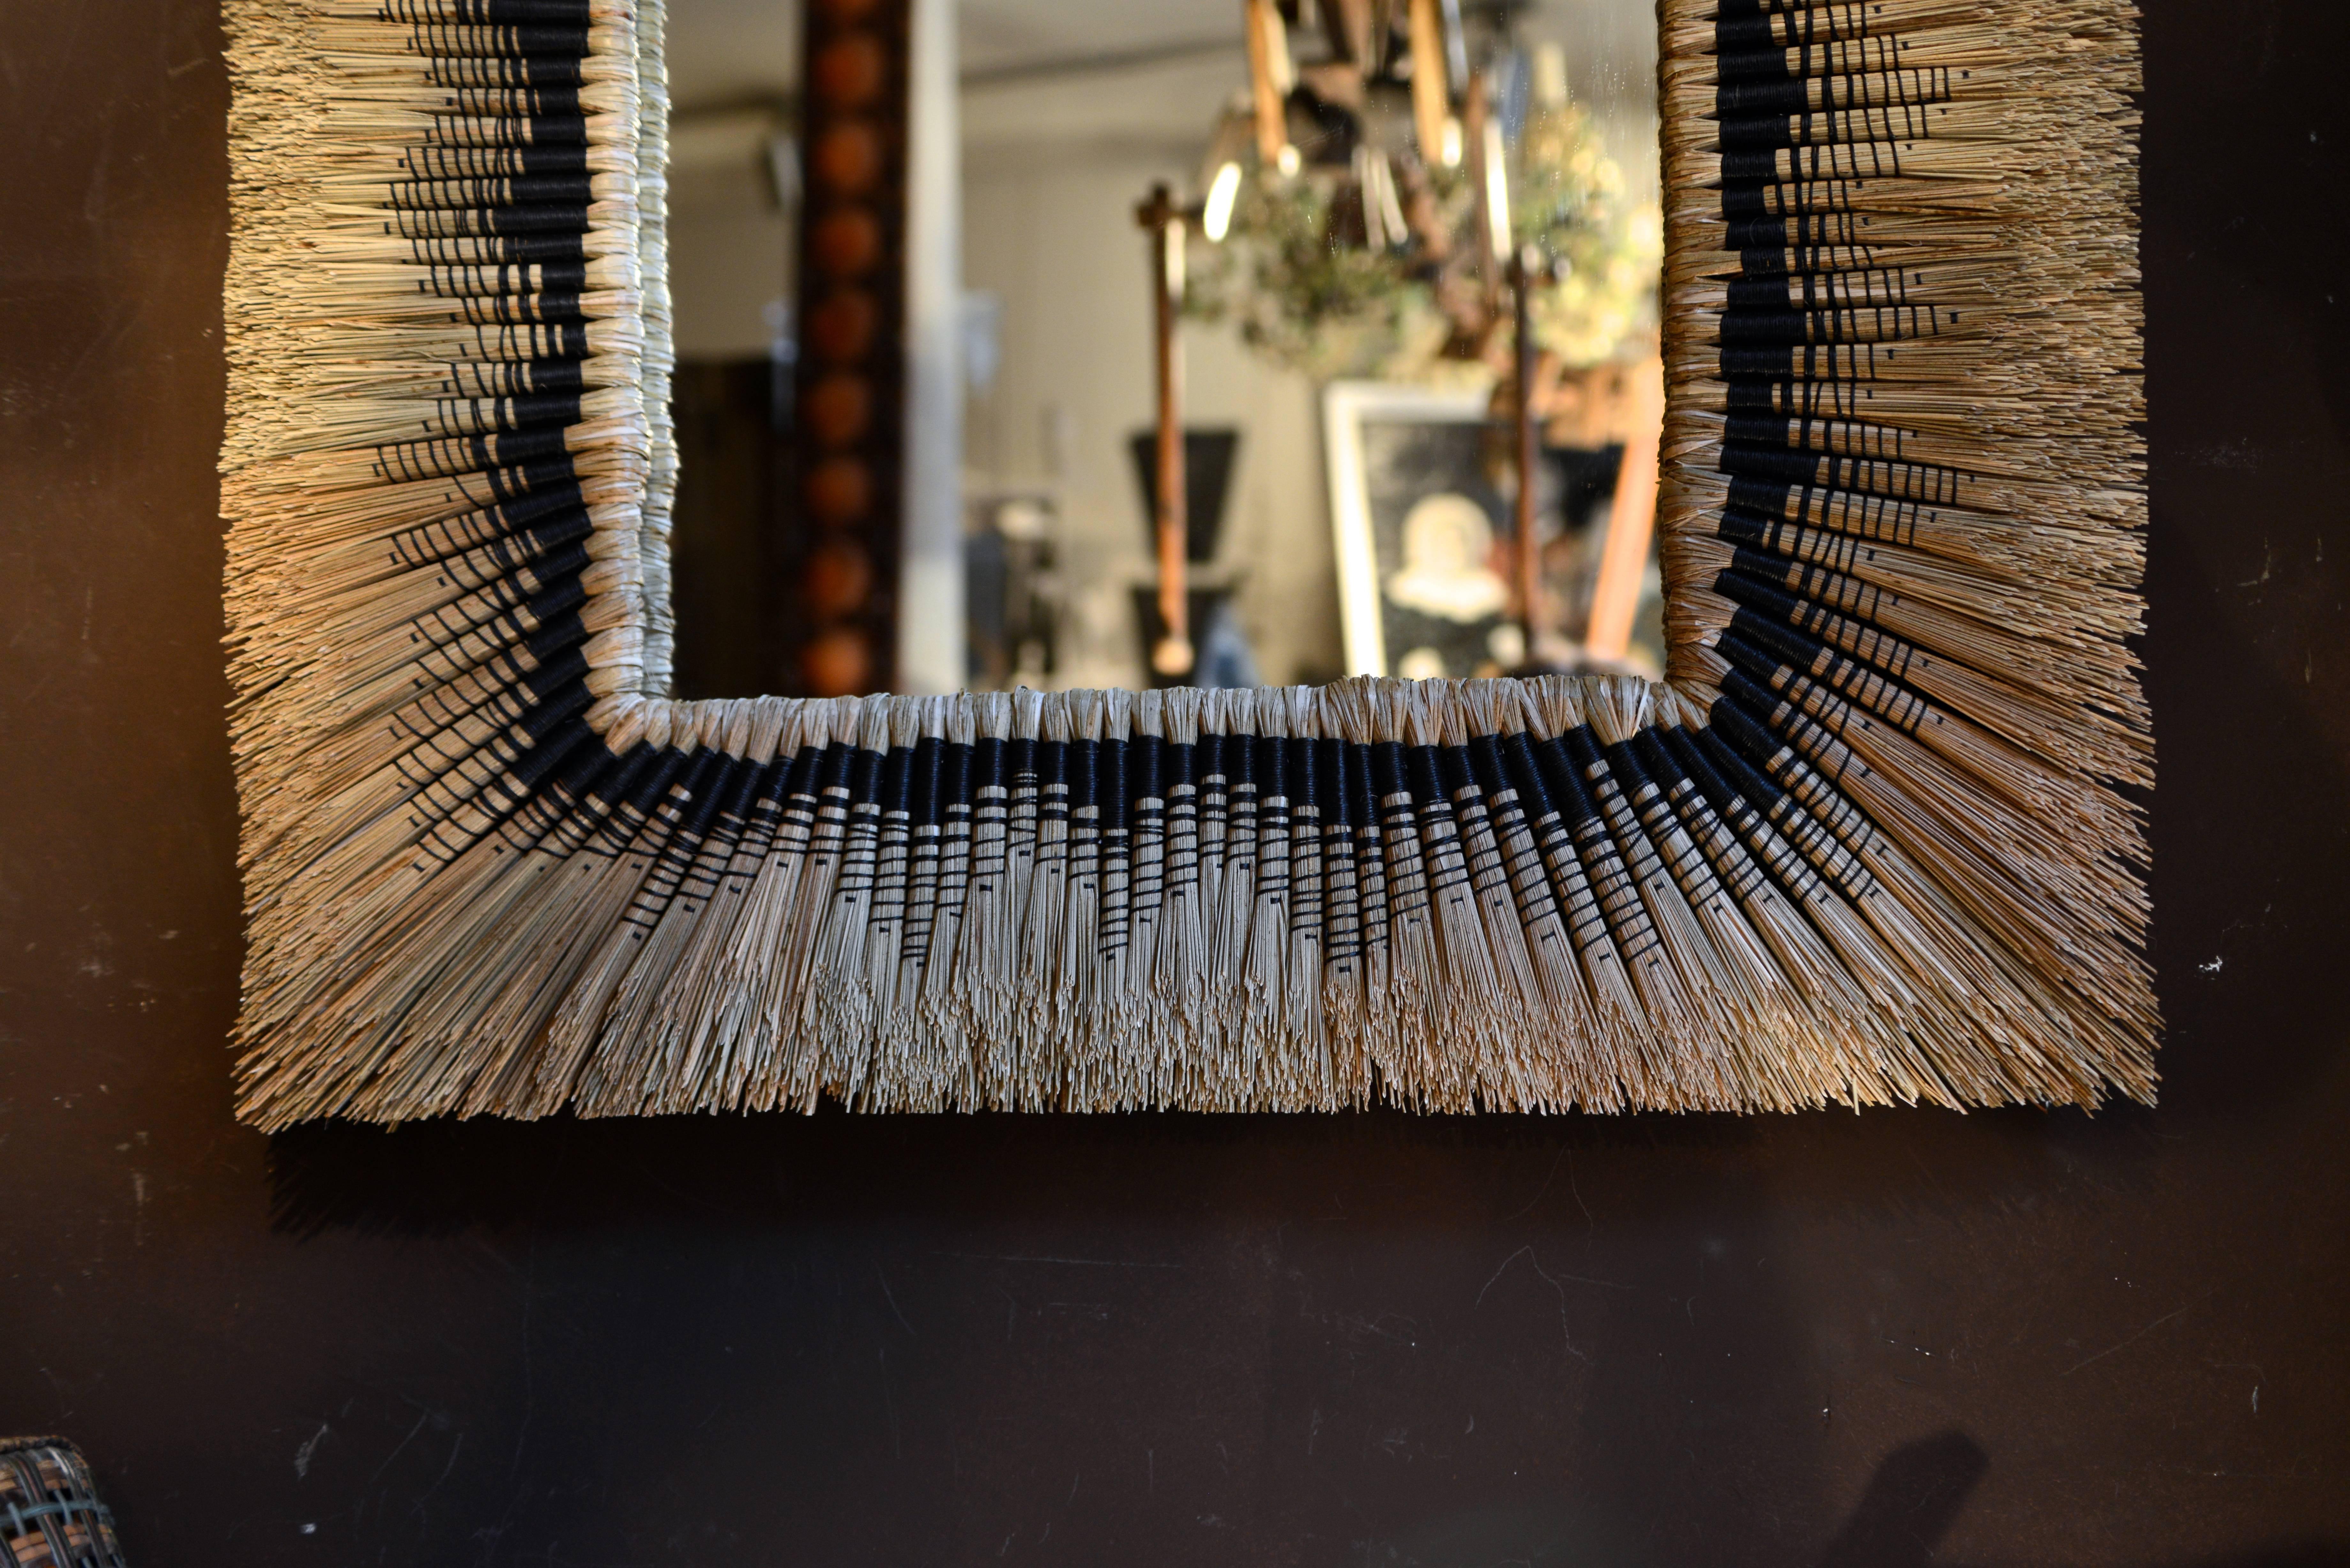 Very atypical straw frame mirror in raffia and braiding, in the spirit of the 1940s - Rare work.
France, contemporary work.
Dimensions: 5 X 79 X 101 cm 
Mirror dimensions: 42 X 67 cm 
